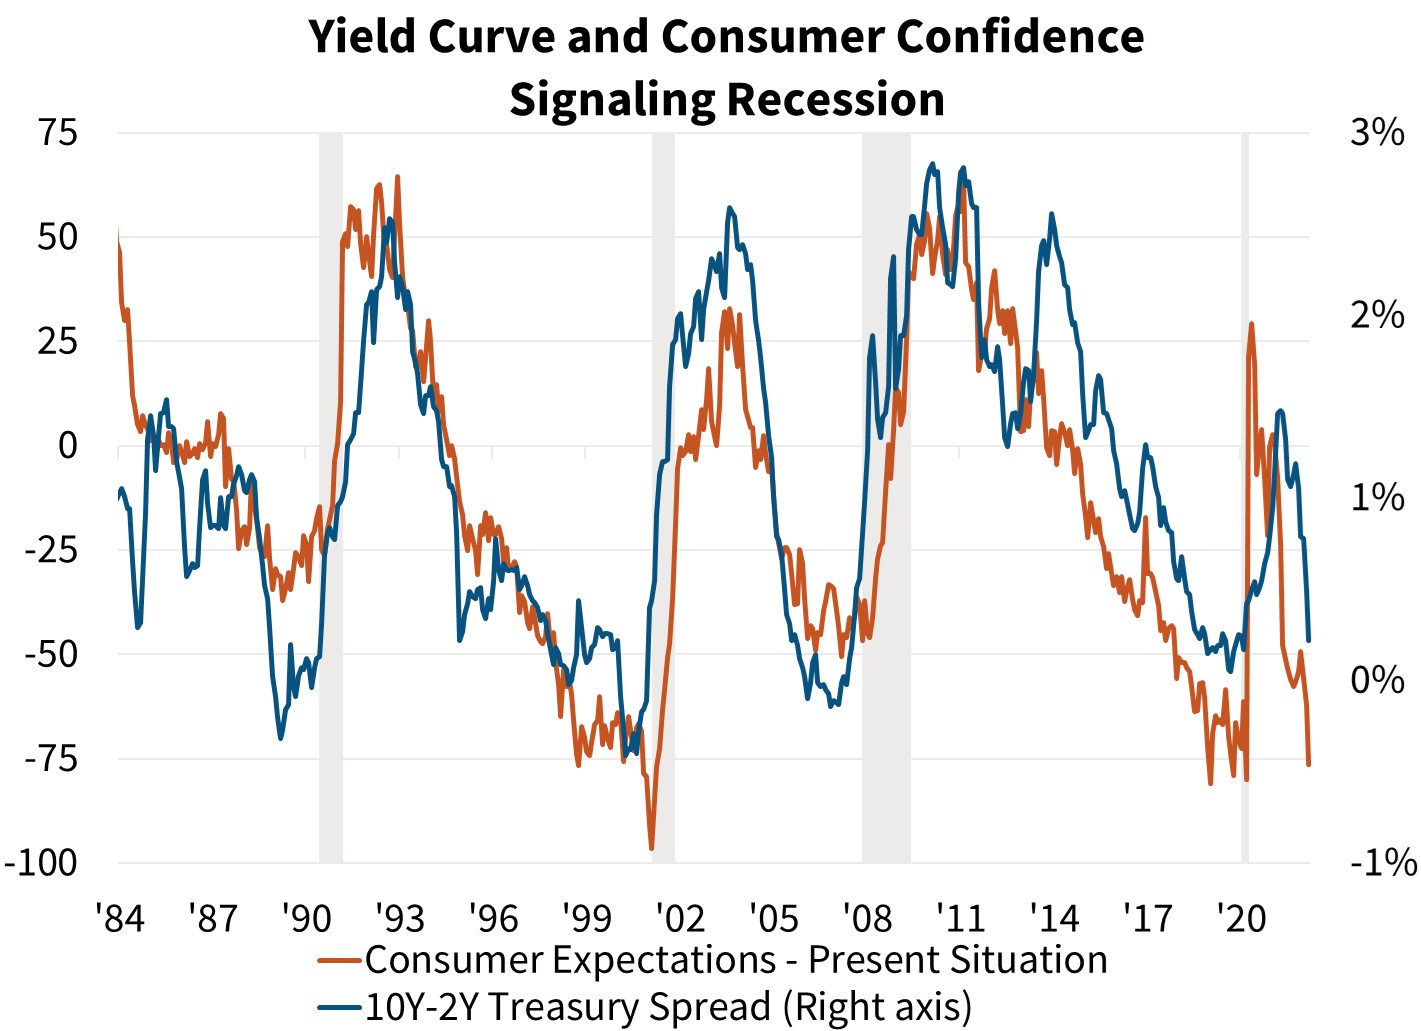  Yield Curve and Consumer Confidence Signaling Recession